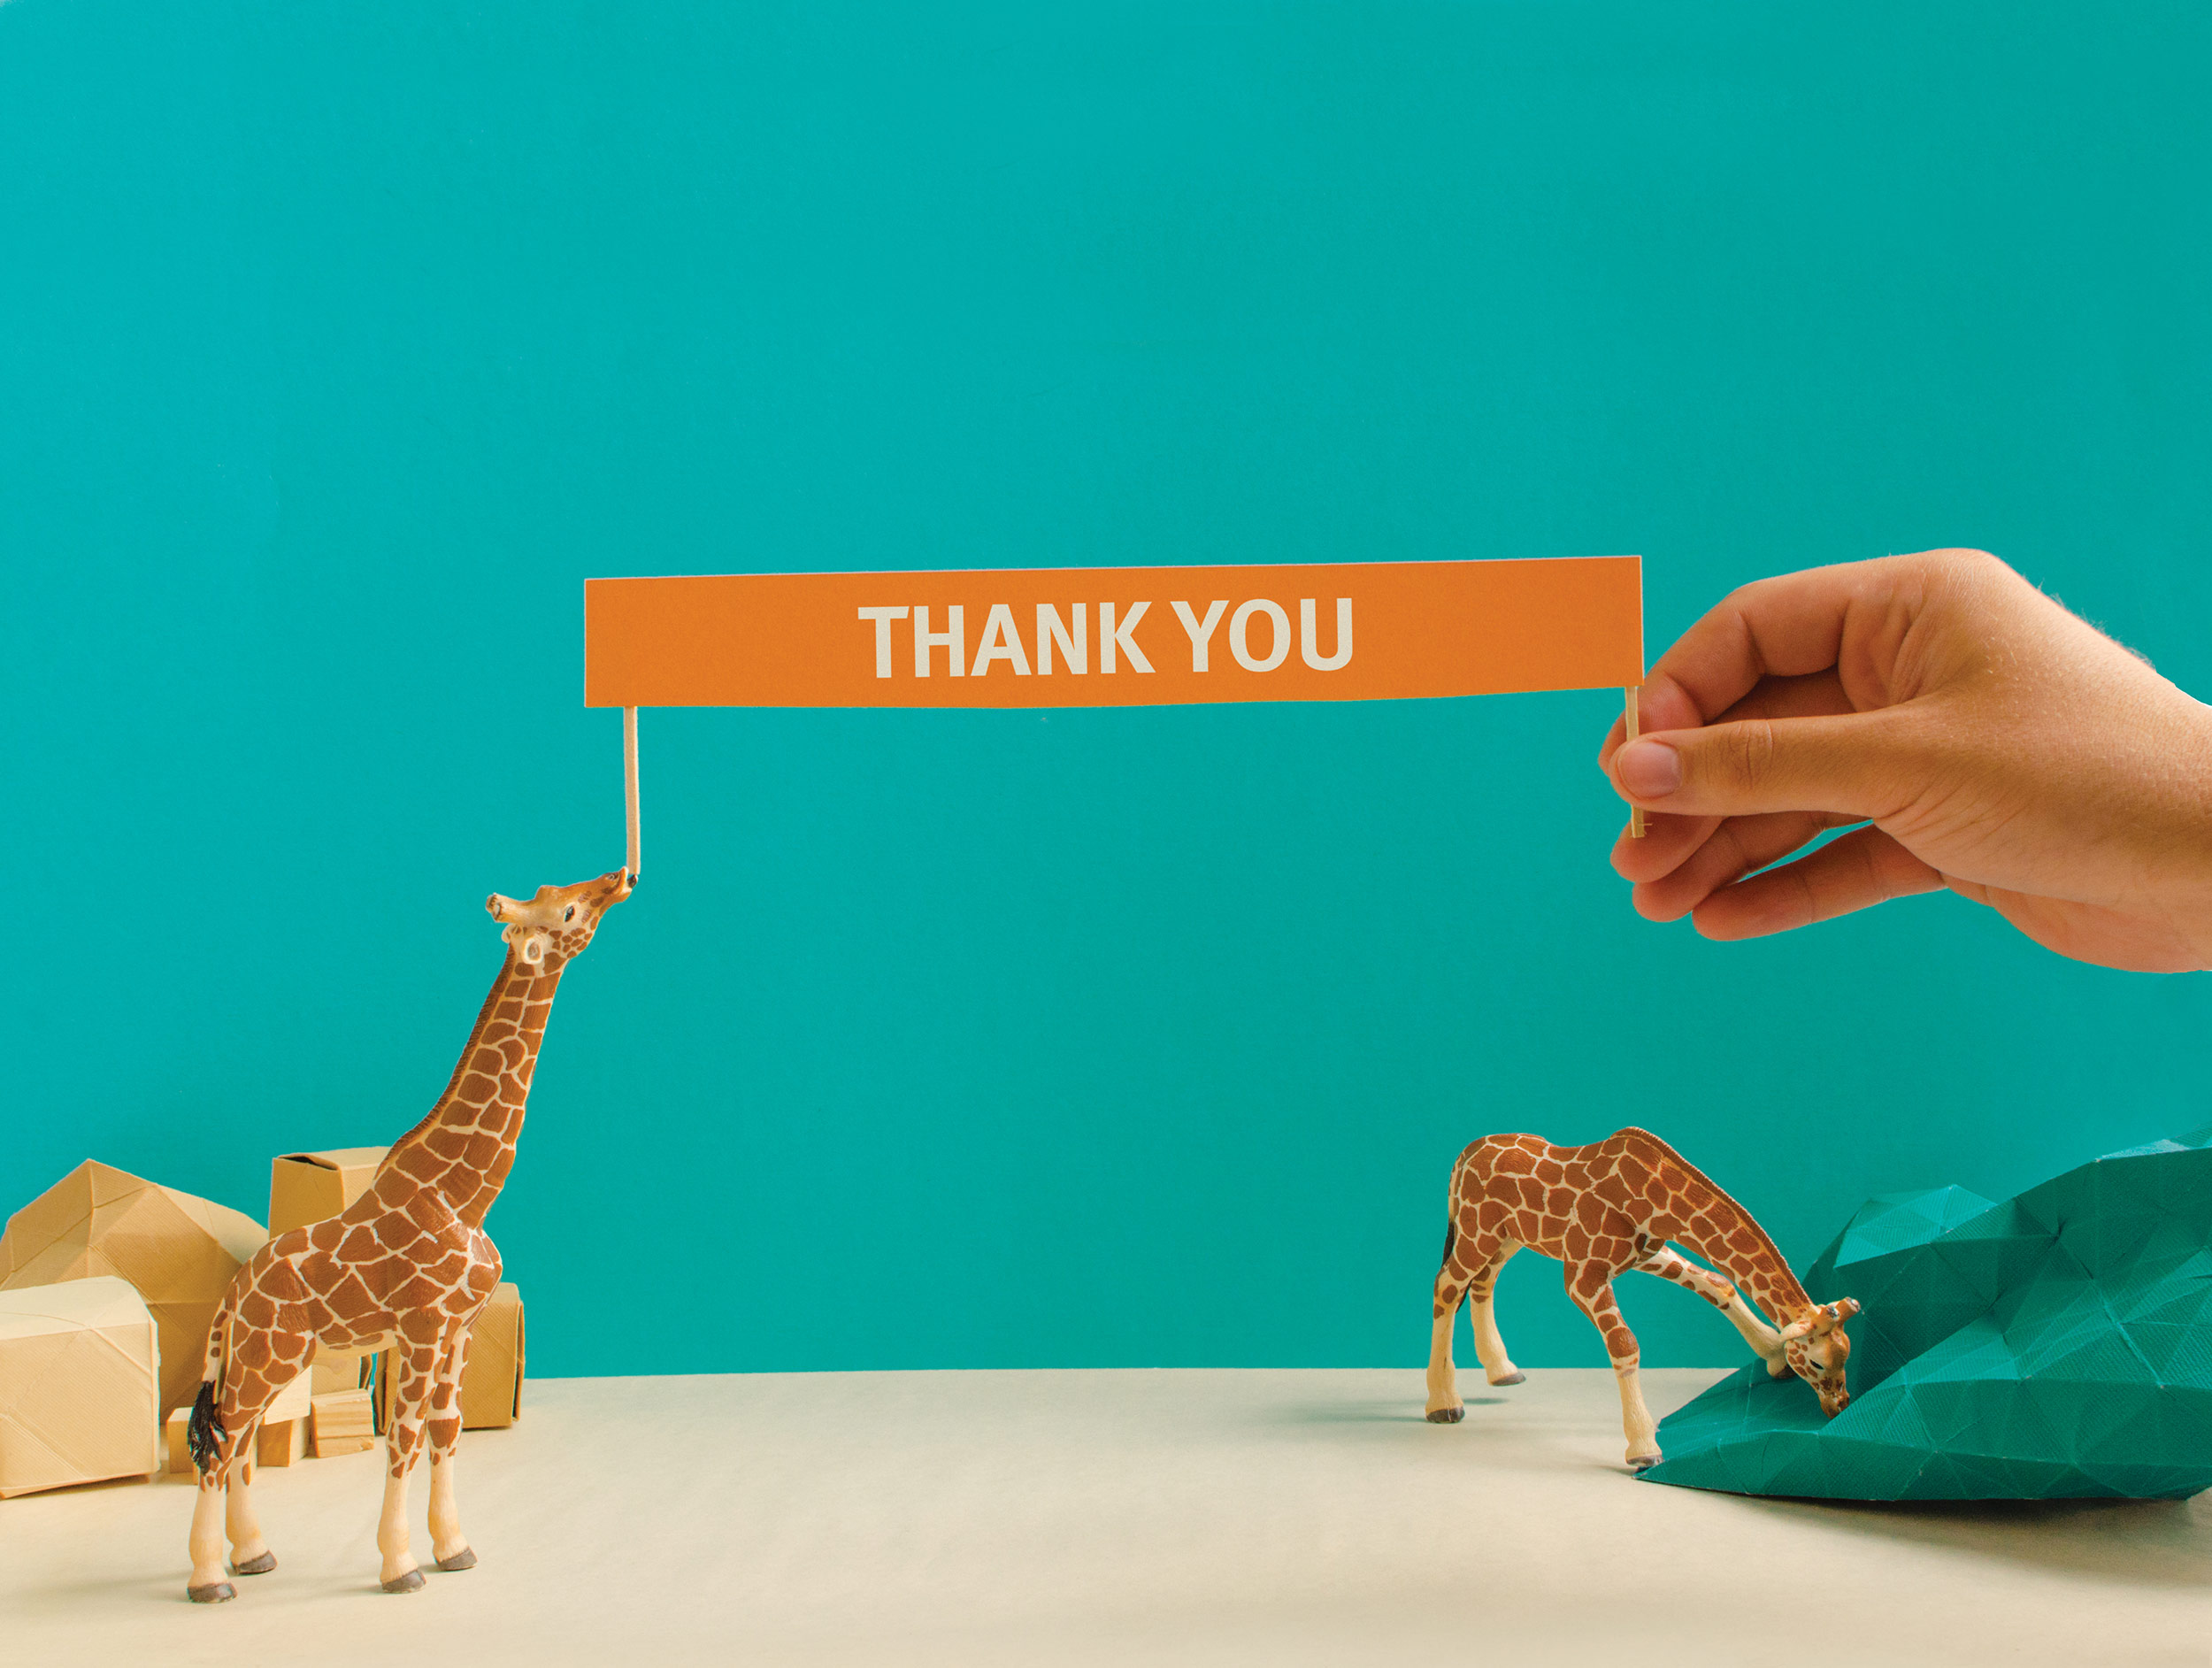 Thank you - St. Louis Zoo Annual Report Design